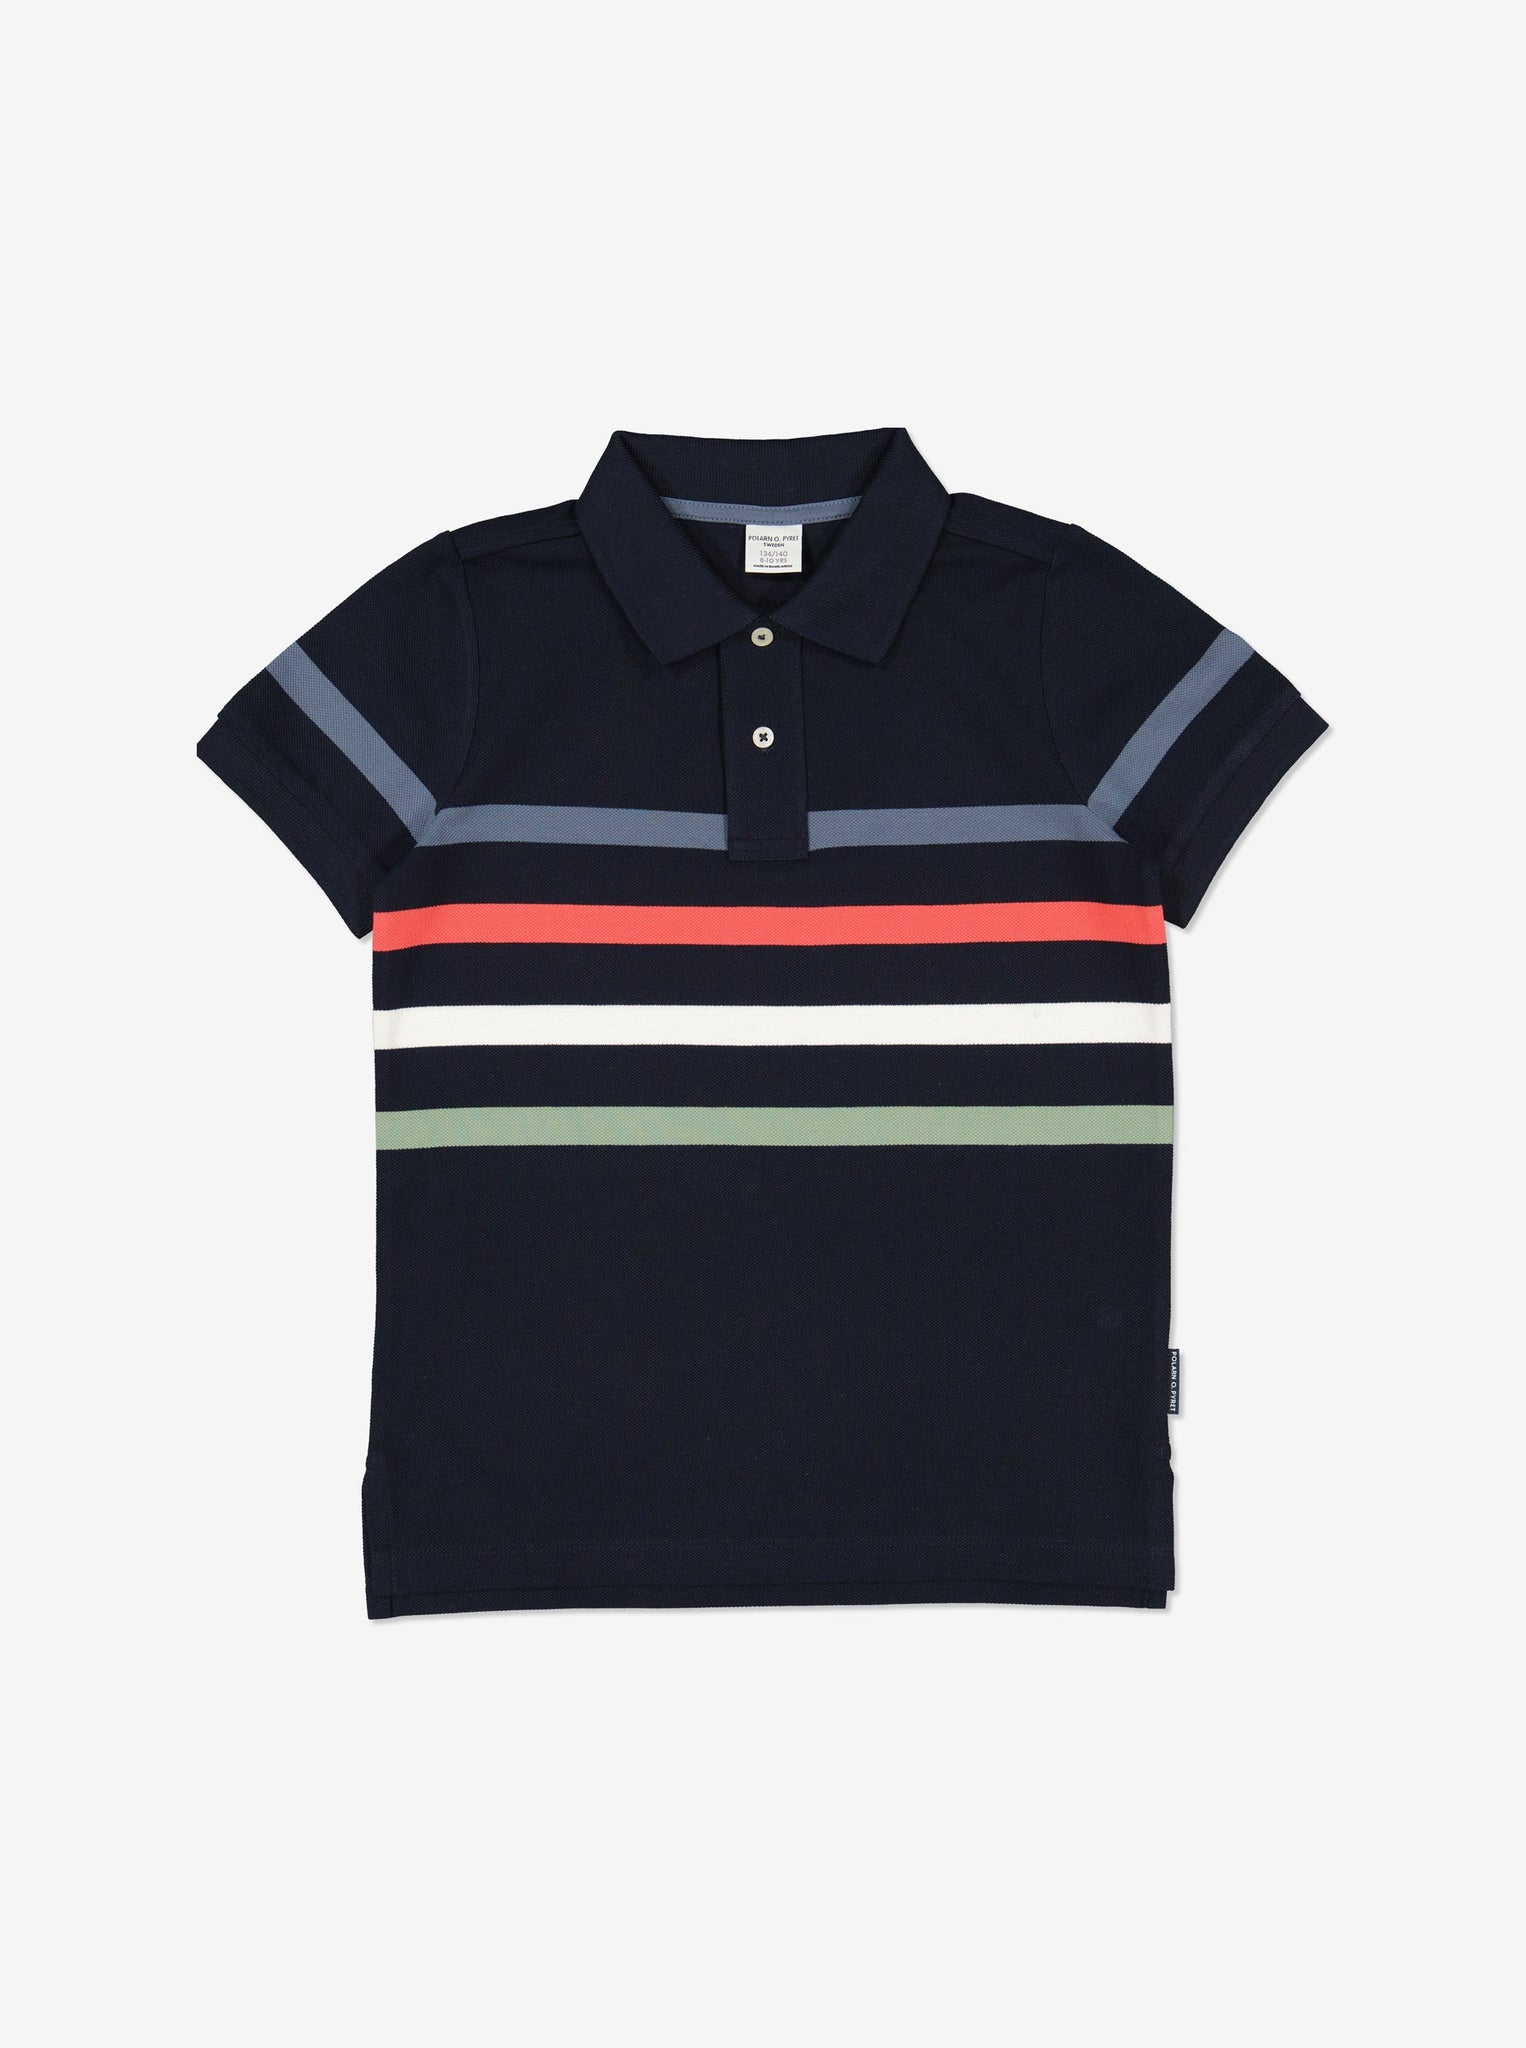 Striped Navy Boys Polo Top from Polarn O. Pyret Kidswear. Made from 100% GOTS Organic Cotton.